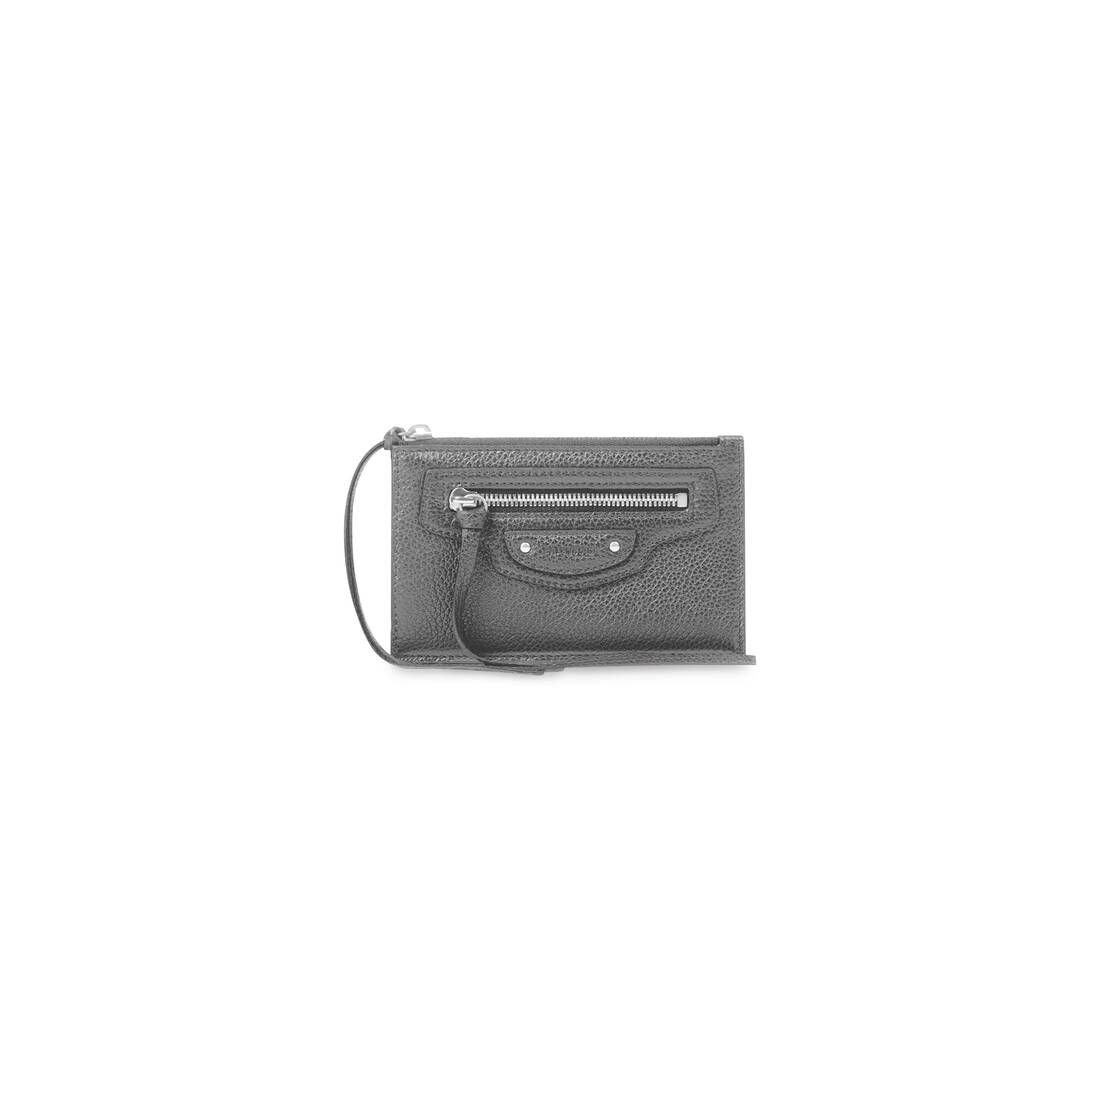 Women's Neo Classic Long Coin And Card Holder in Black/silver